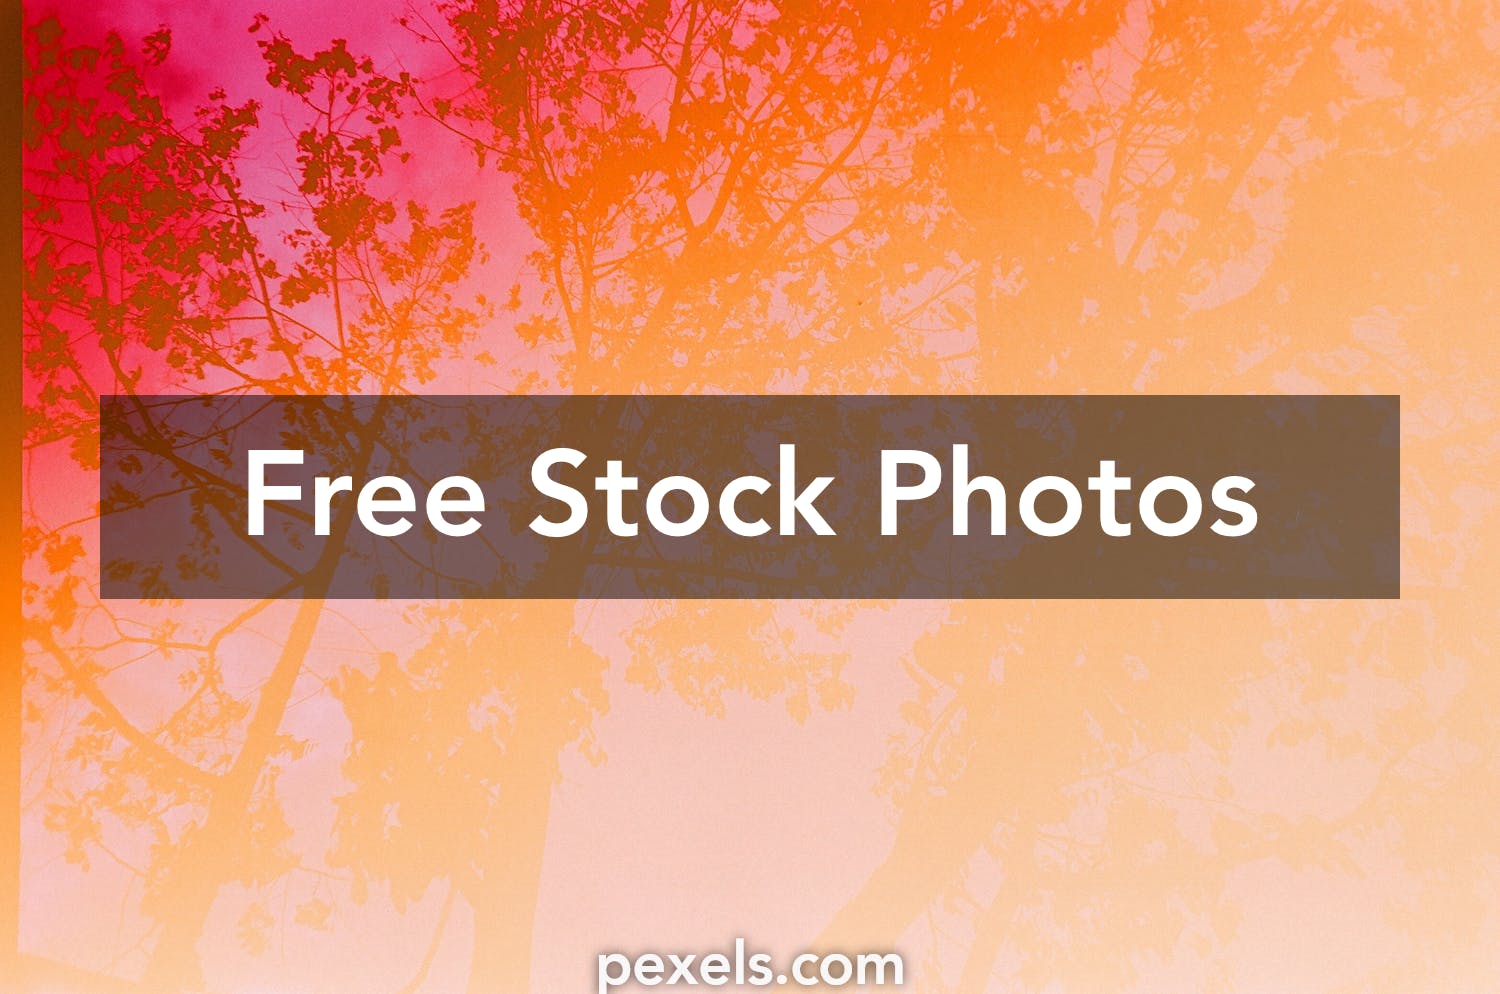 100 000 Best Banner Background Photos 100 Free Download Pexels Stock Photos